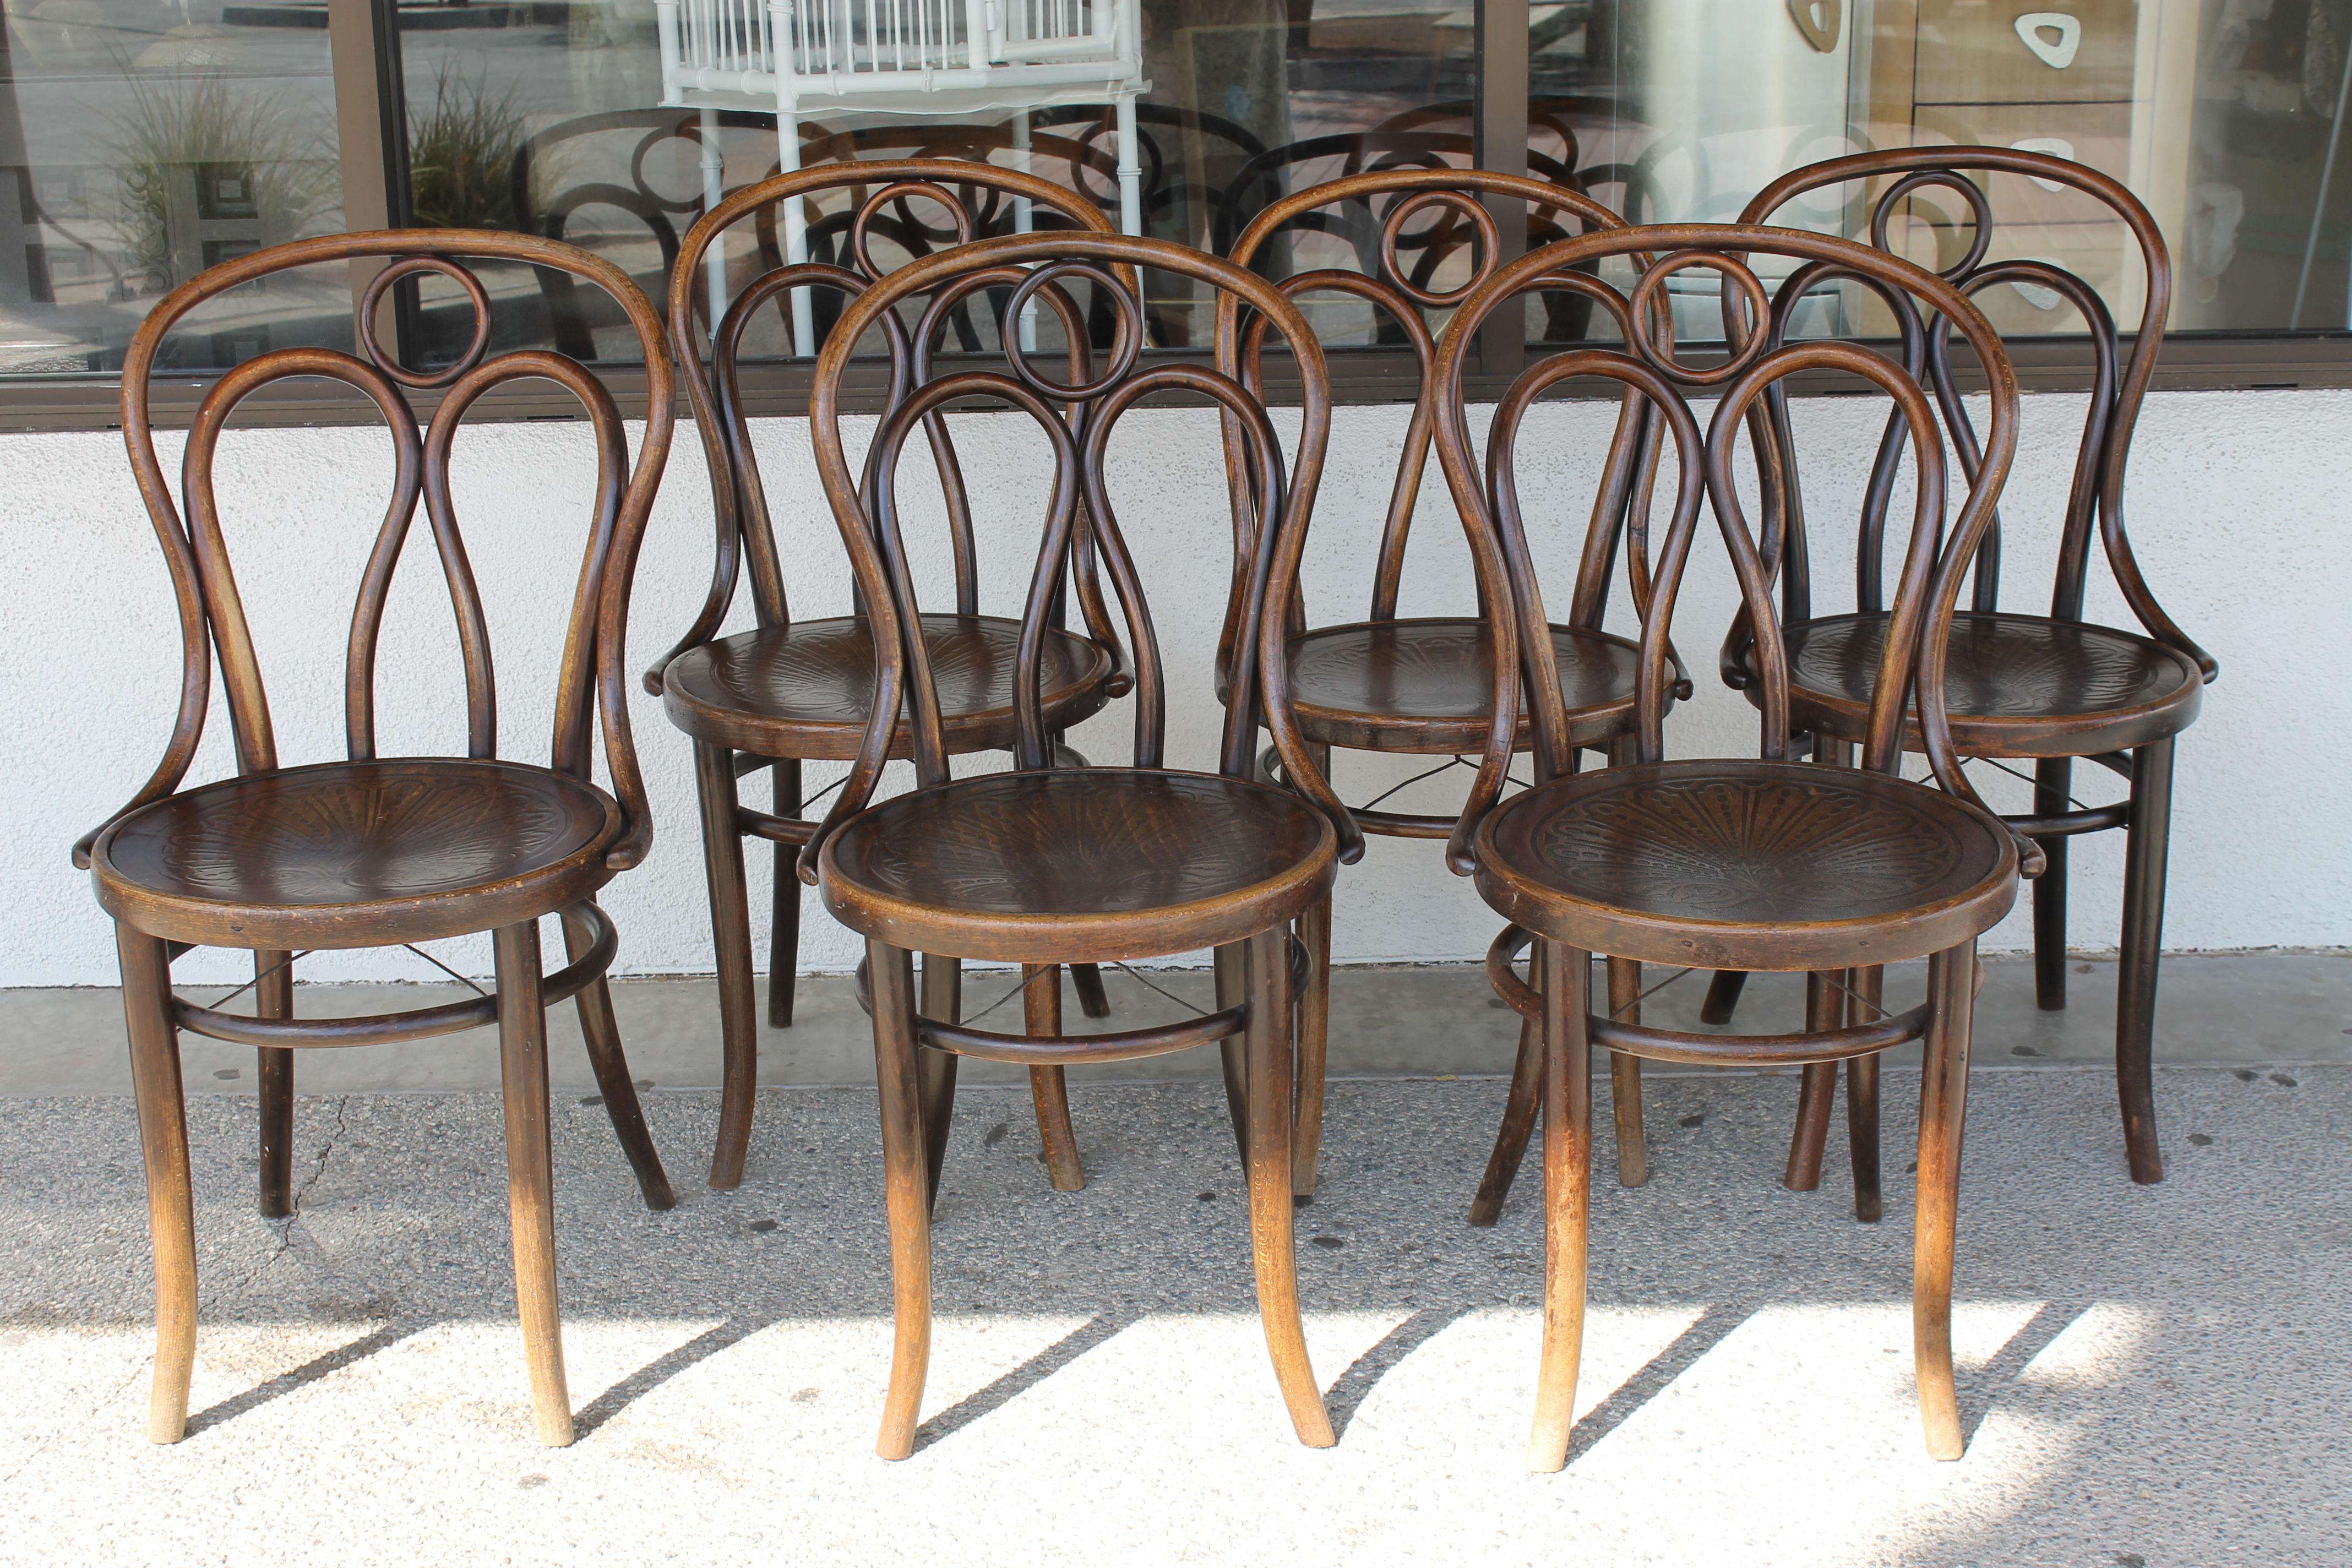 Six chairs by Mundus and J. & J. Kohn Ltd. Made in Czecho-Slovakia. After Thonet. I was told the metal support underneath these chairs were an addition at some point. Chairs measure 17.5